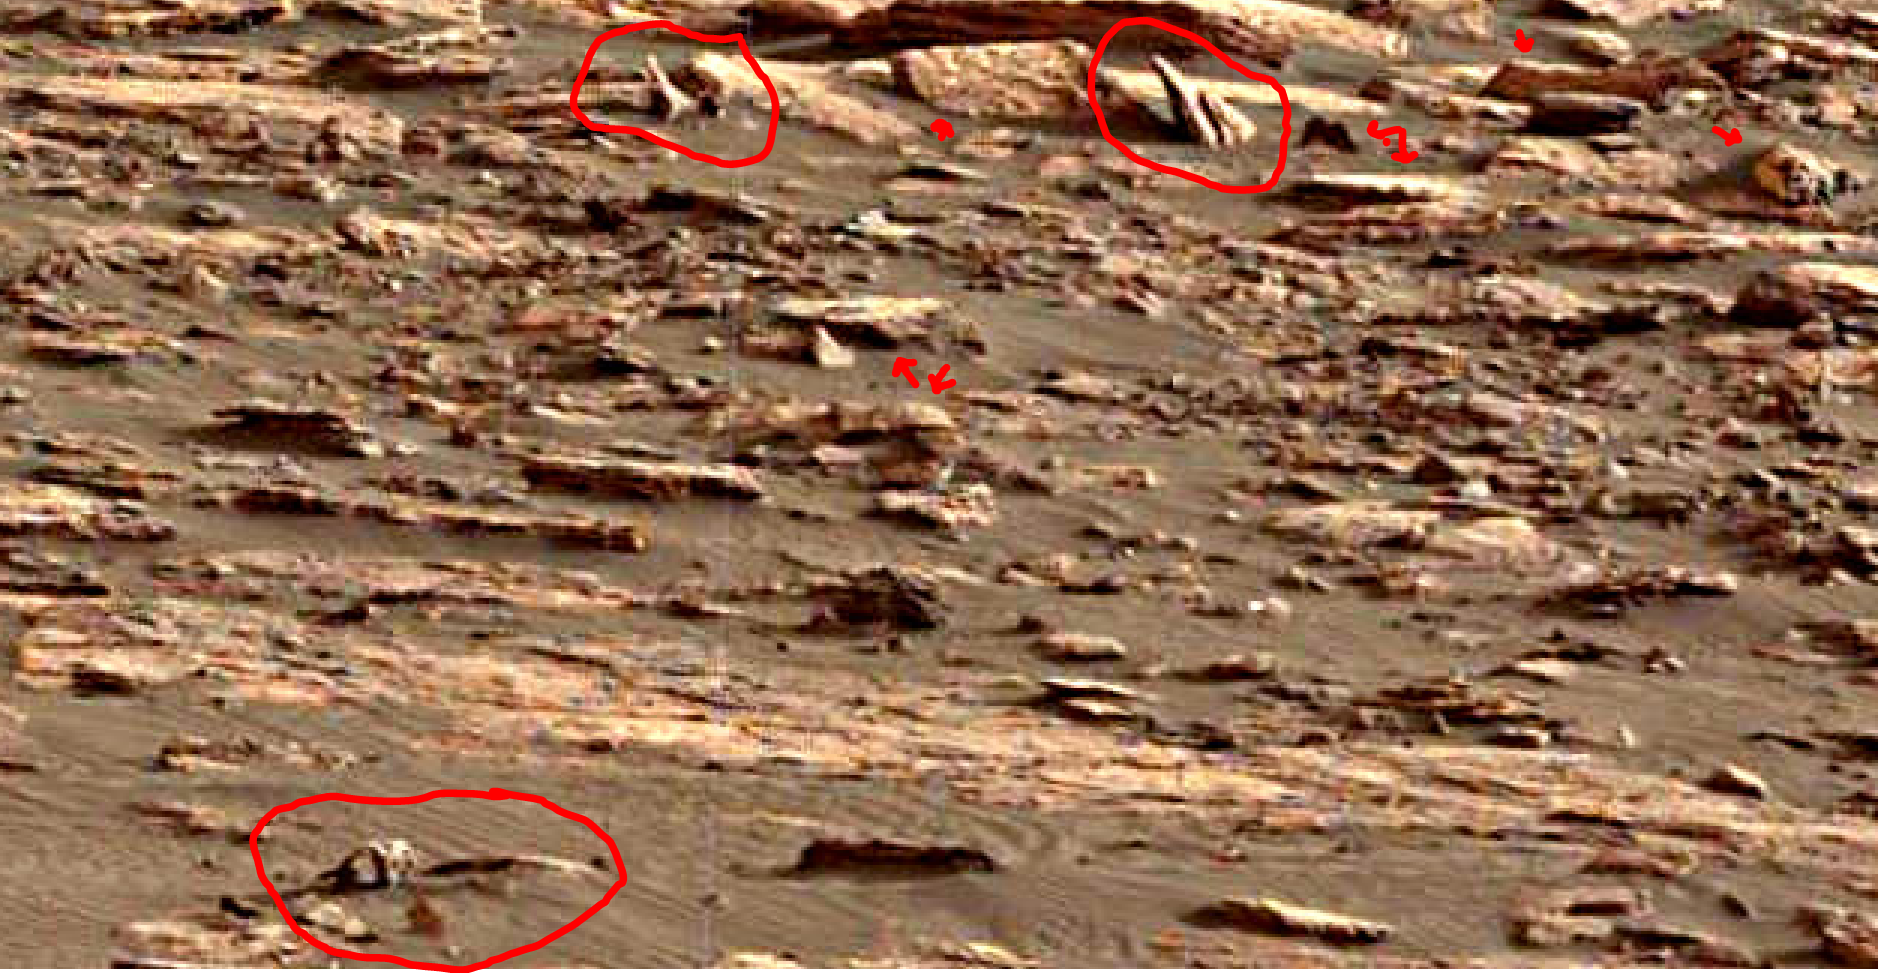 mars-sol-1512-anomaly-artifacts-10-was-life-on-mars